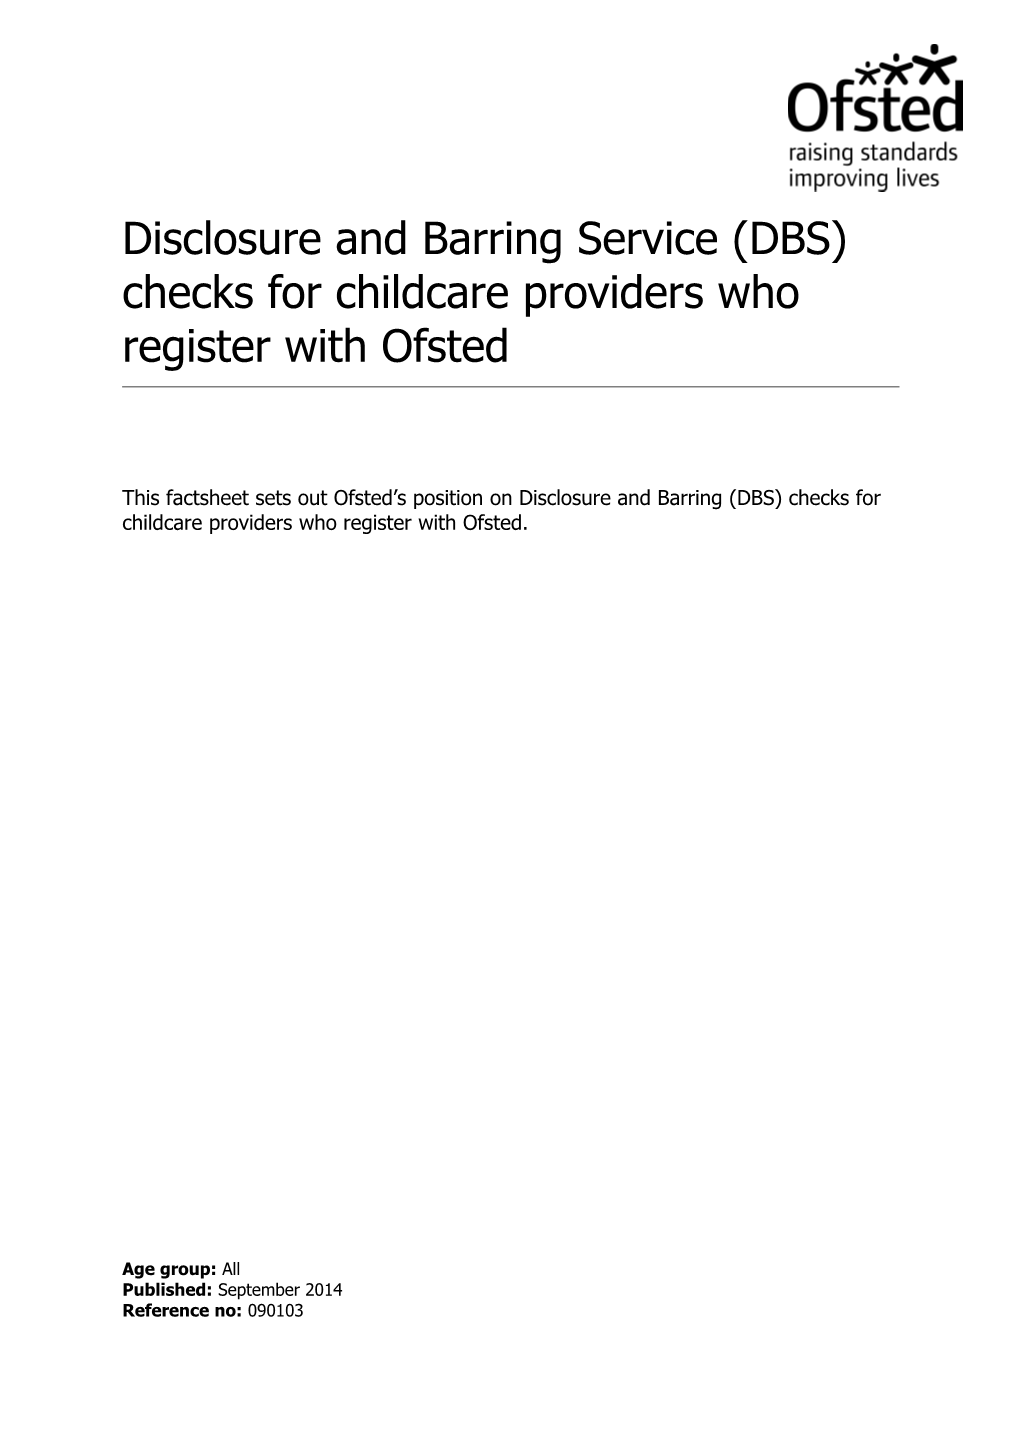 Disclosure and Barring Service (DBS) Checks for Those Providers Who Register with Ofsted